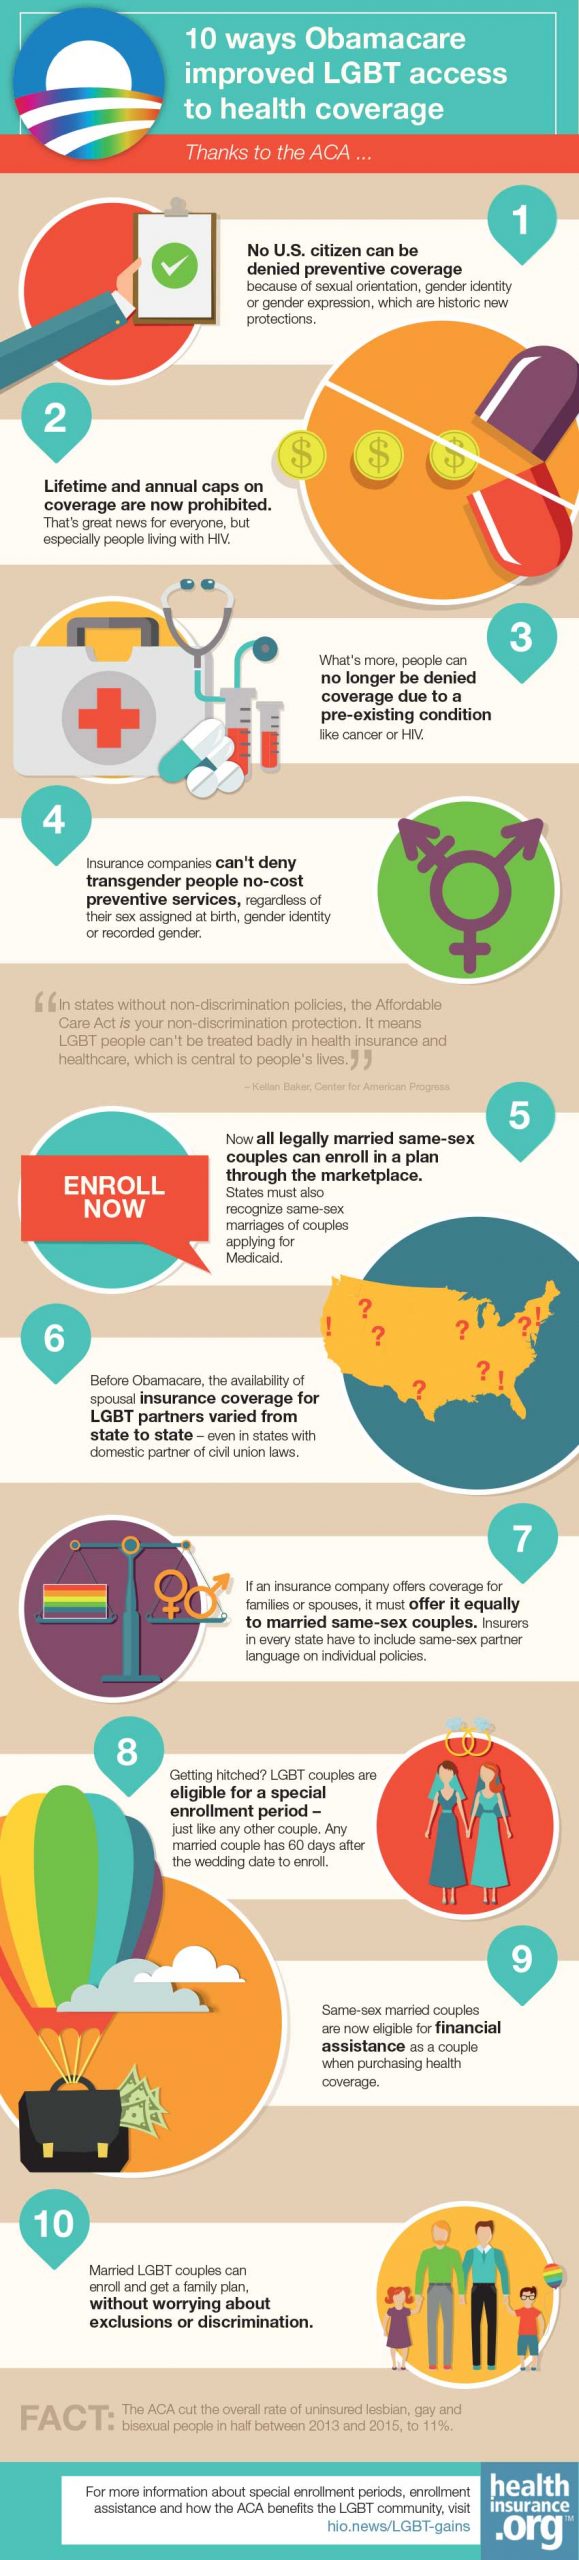 10 ways Obamacare improved LGBT access to health care